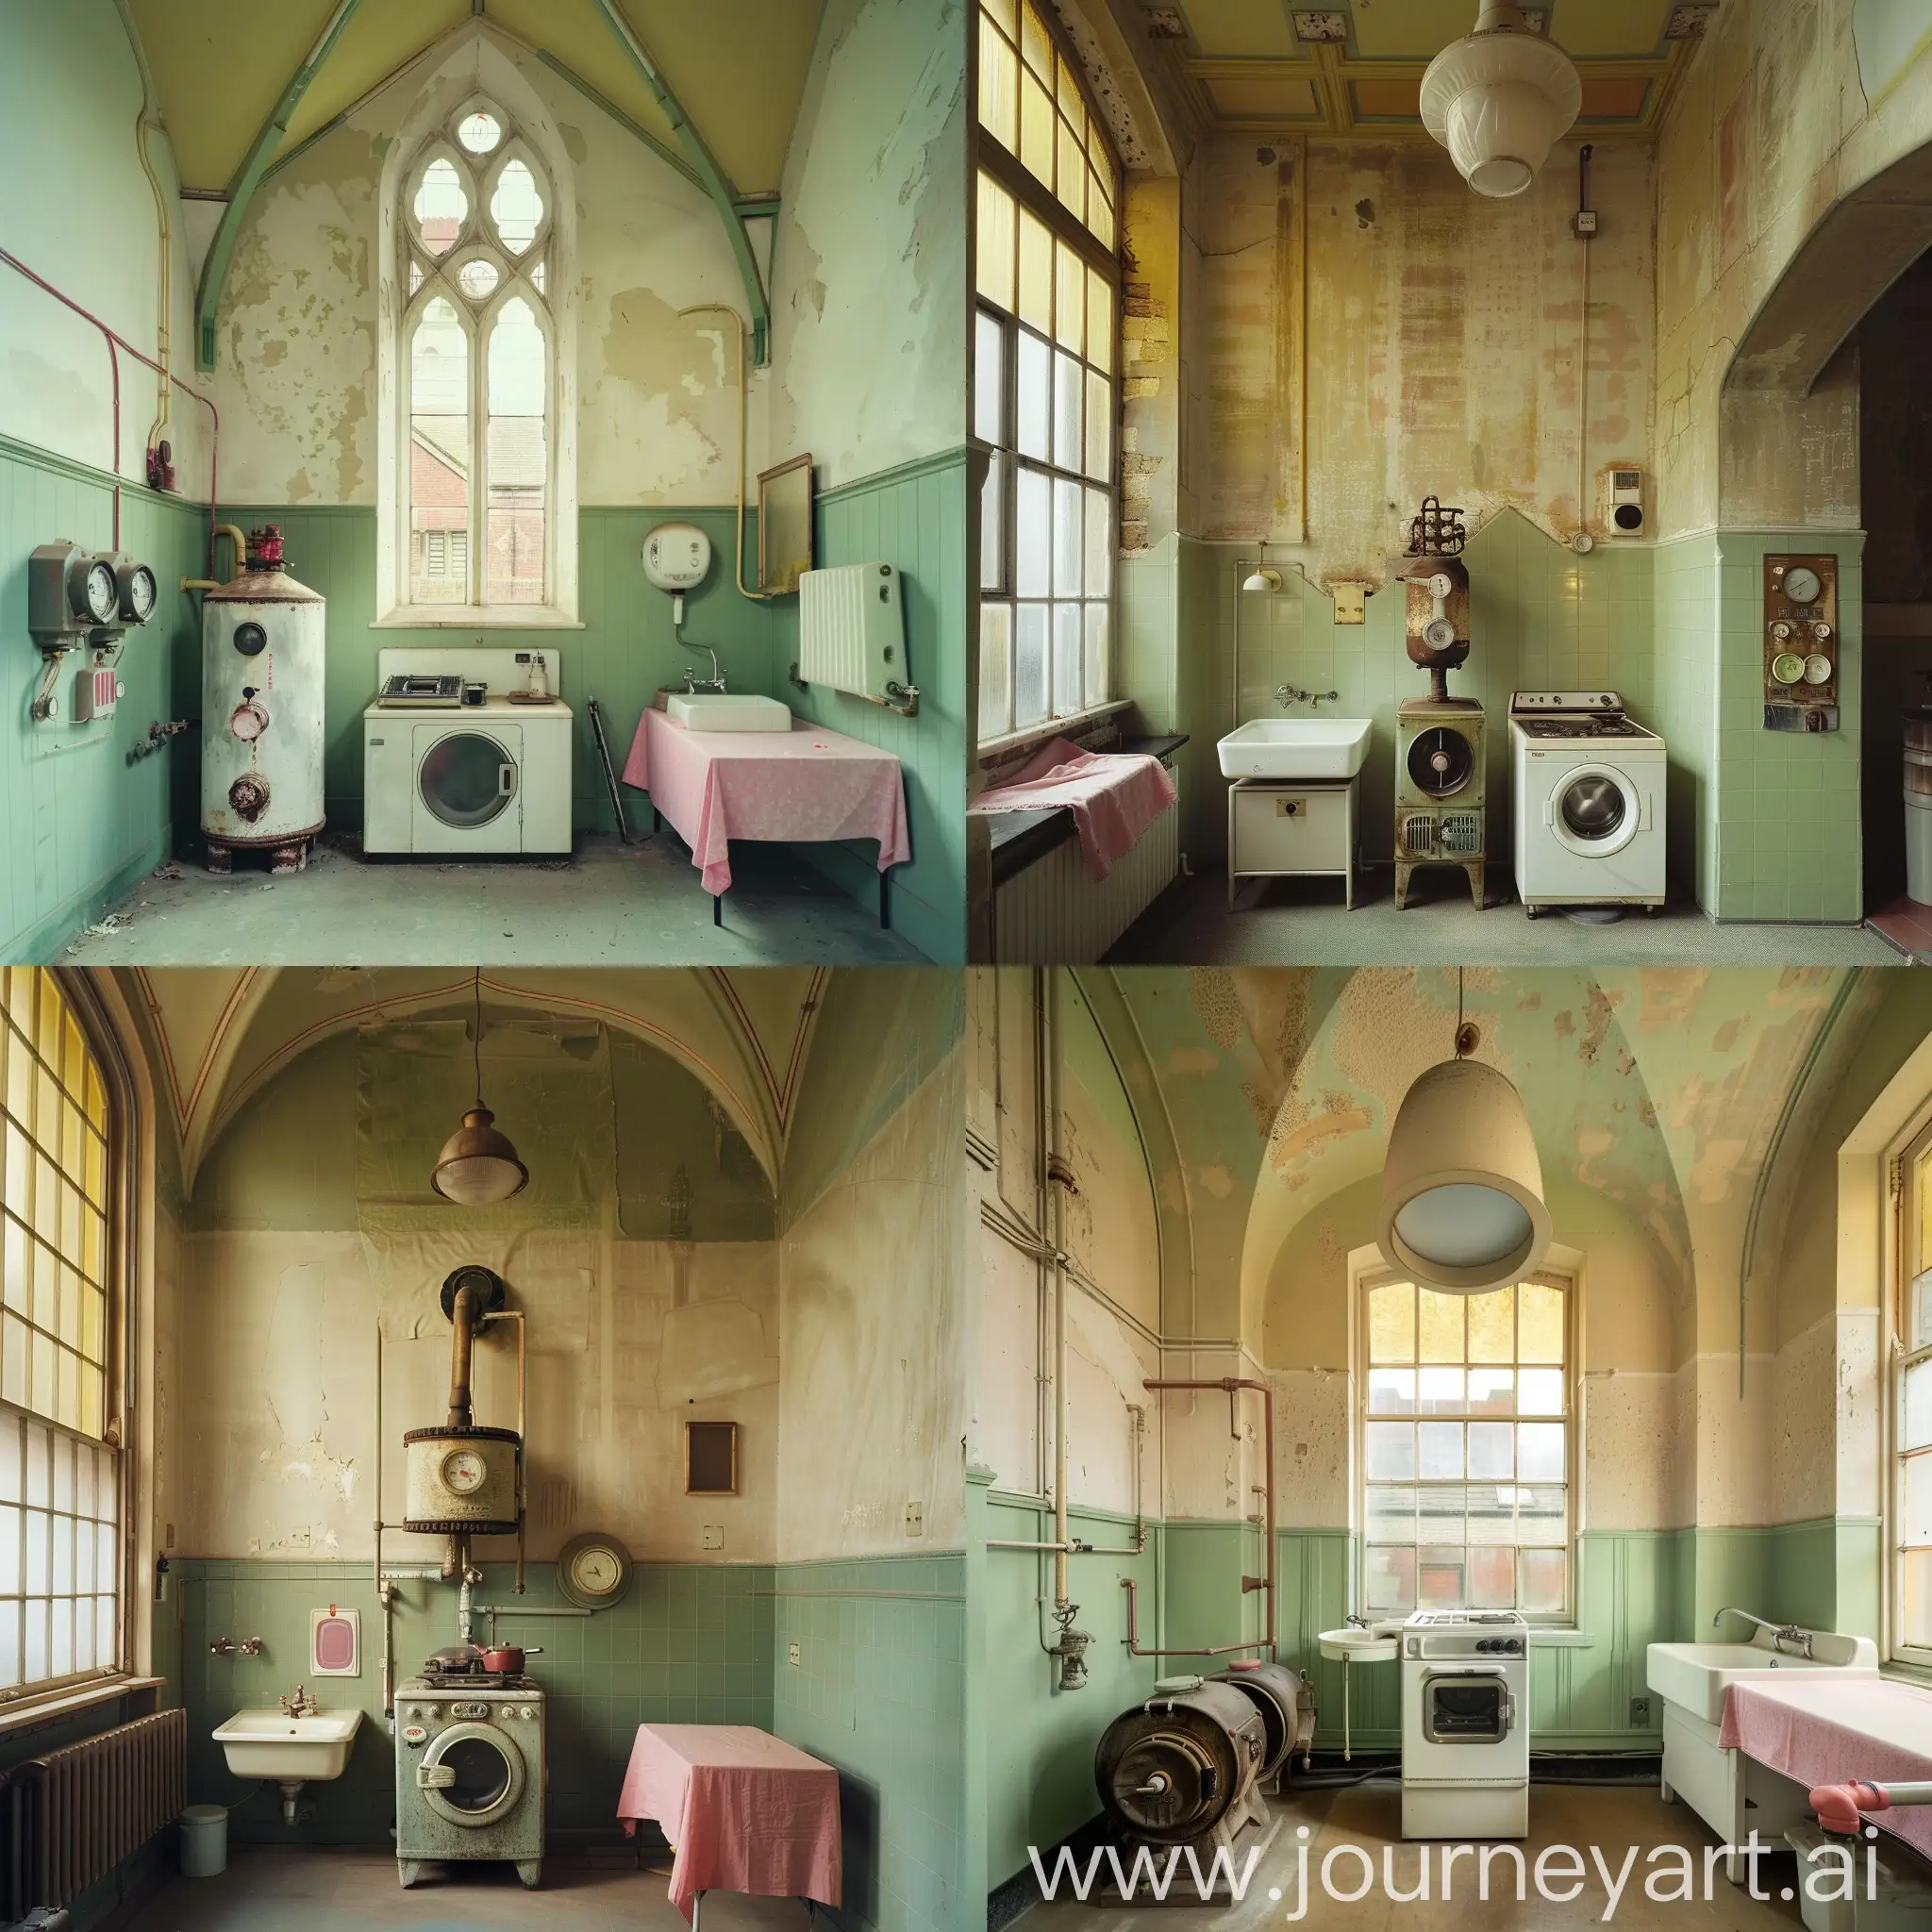 This image showcases a room with an aura of a bygone era, suggesting a multifunctional space possibly utilized as an old kitchen or laundry area. High ceilings washed in a soft, creamy hue contrast with a green dado that wraps the walls. An antiquated gas boiler clings to the wall beside a white porcelain sink, hinting at utilitarian purposes. Adjacent to these, a classic washing machine stands solidly. The room is bathed in a warm glow filtering through a large window fitted with yellow-tinted panes, casting a nostalgic light. At the heart lies a vintage gas stove, its design echoing the past. Tucked in a corner, a pink tablecloth introduces a dash of vibrancy, softening the room's aged aesthetic. Every element resonates with stories, imbuing the space with a tangible sense of narrative and life lived.